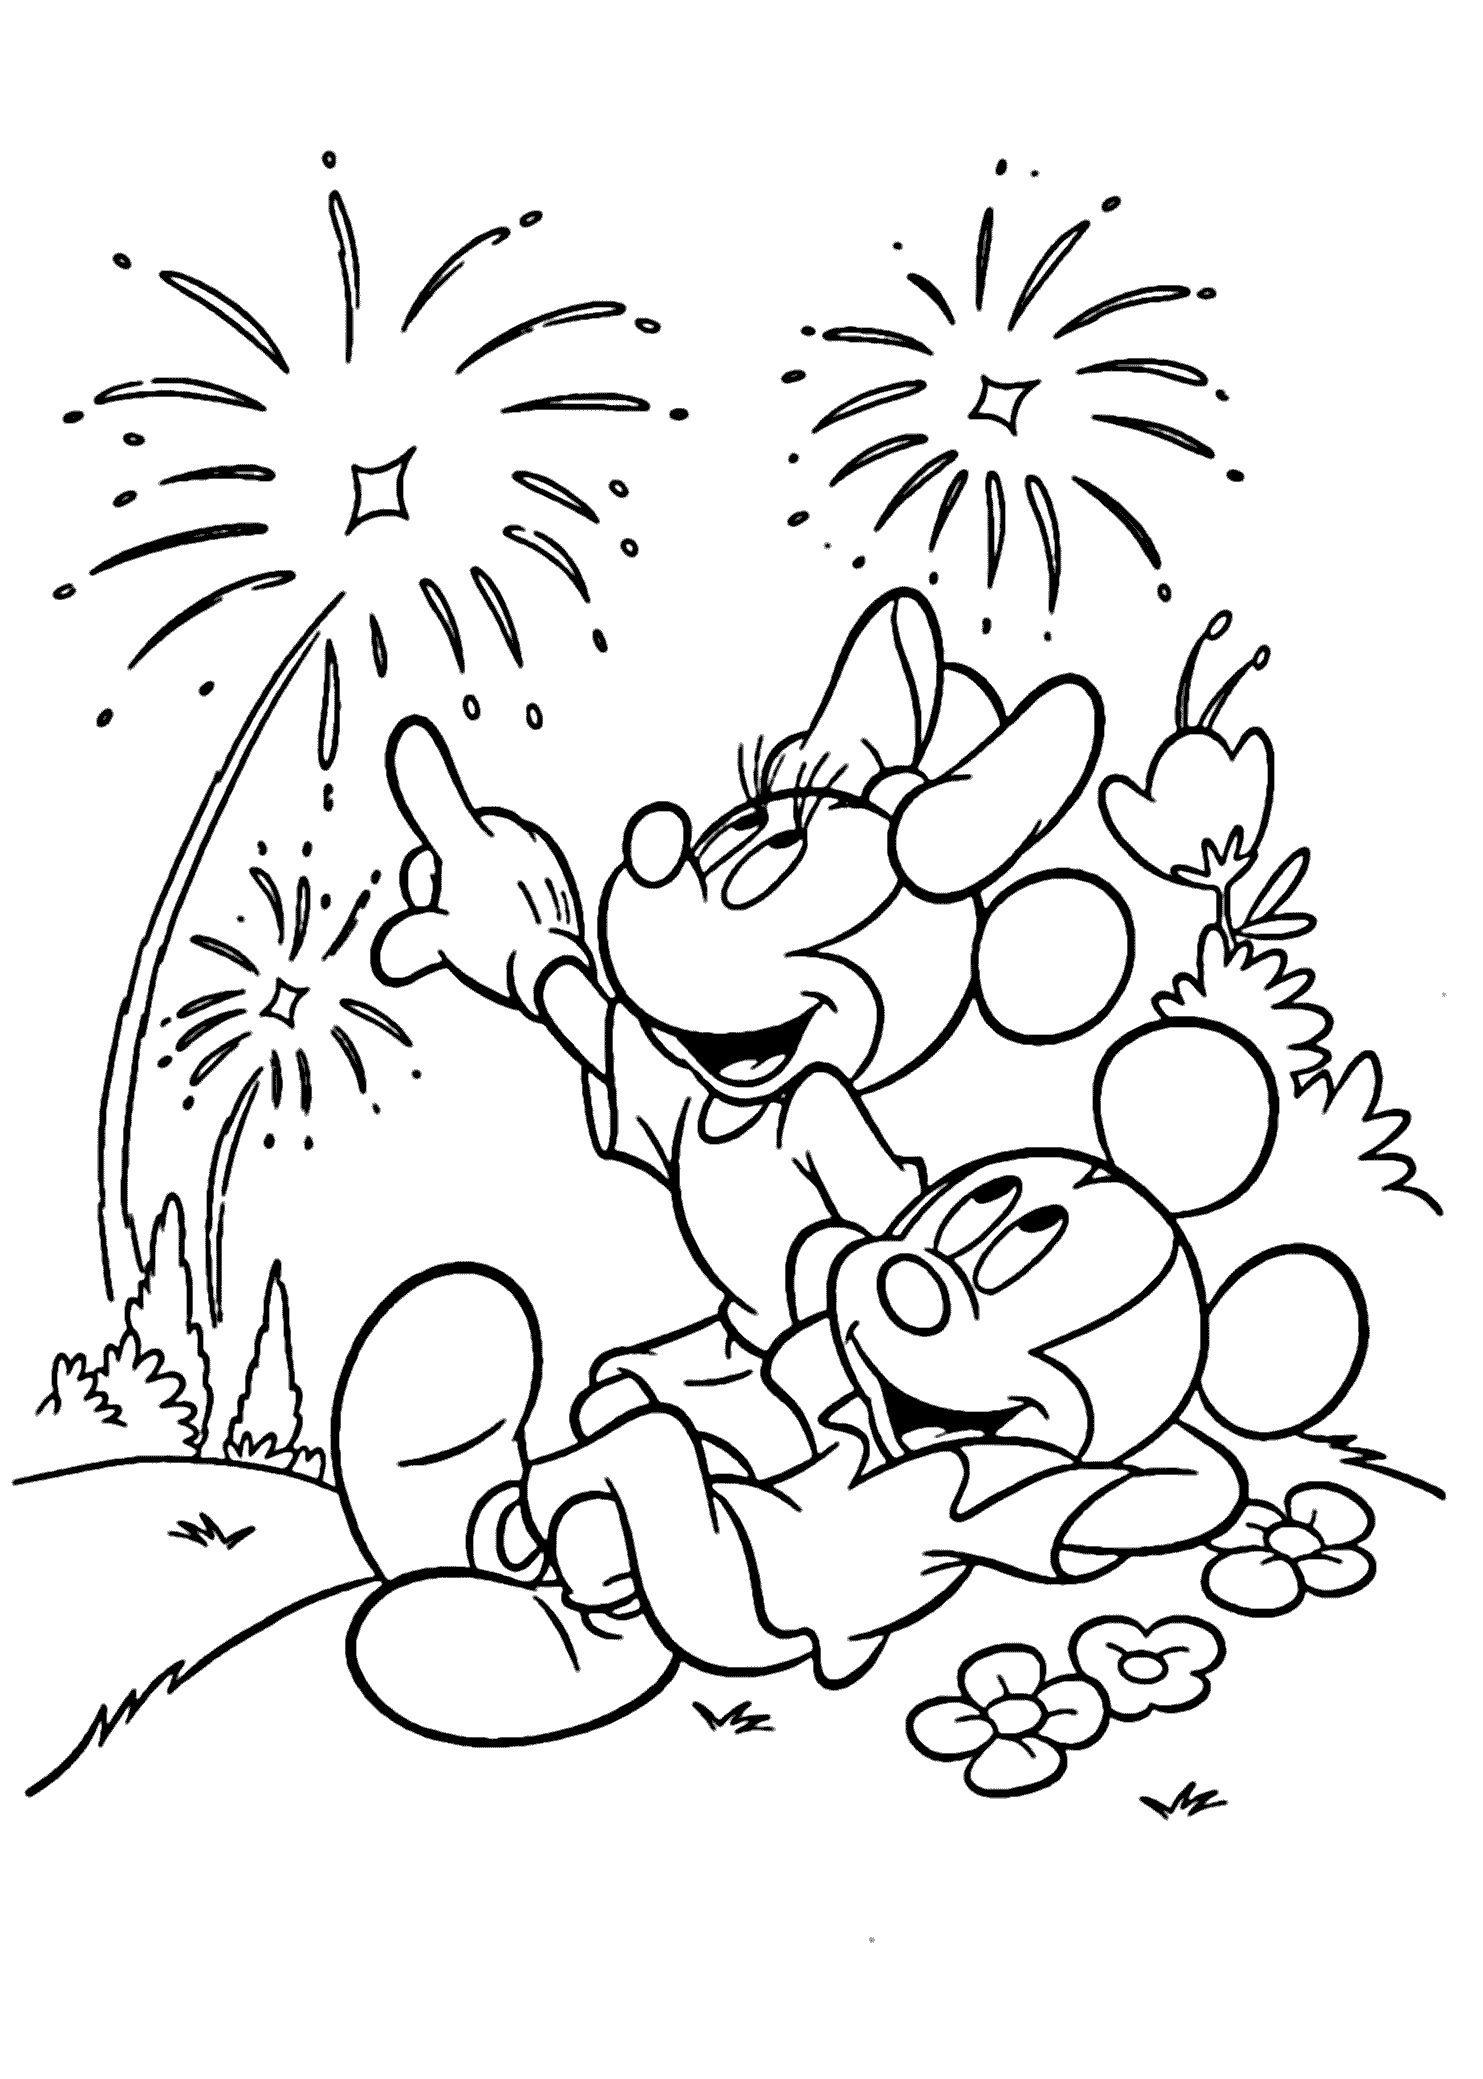 11. Mickey Minnie Mouse New Year Coloring Page